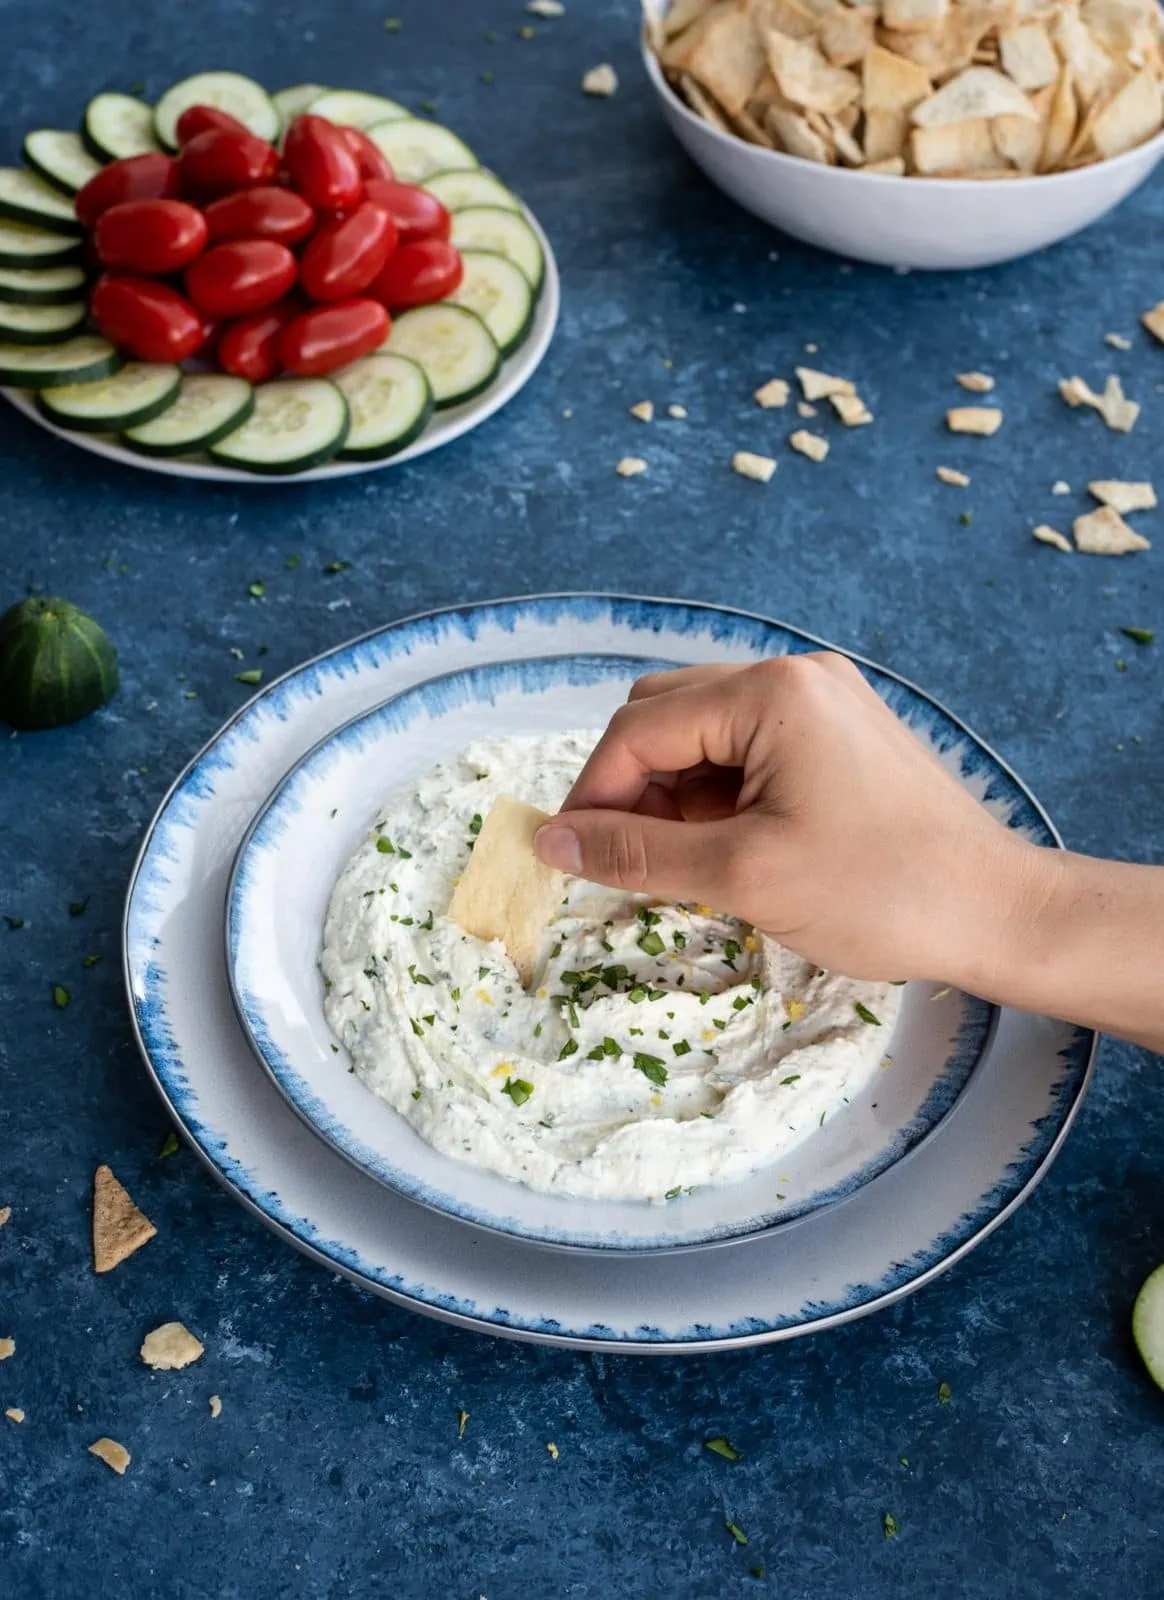 Hand with chip scooping whipped feta with herbs